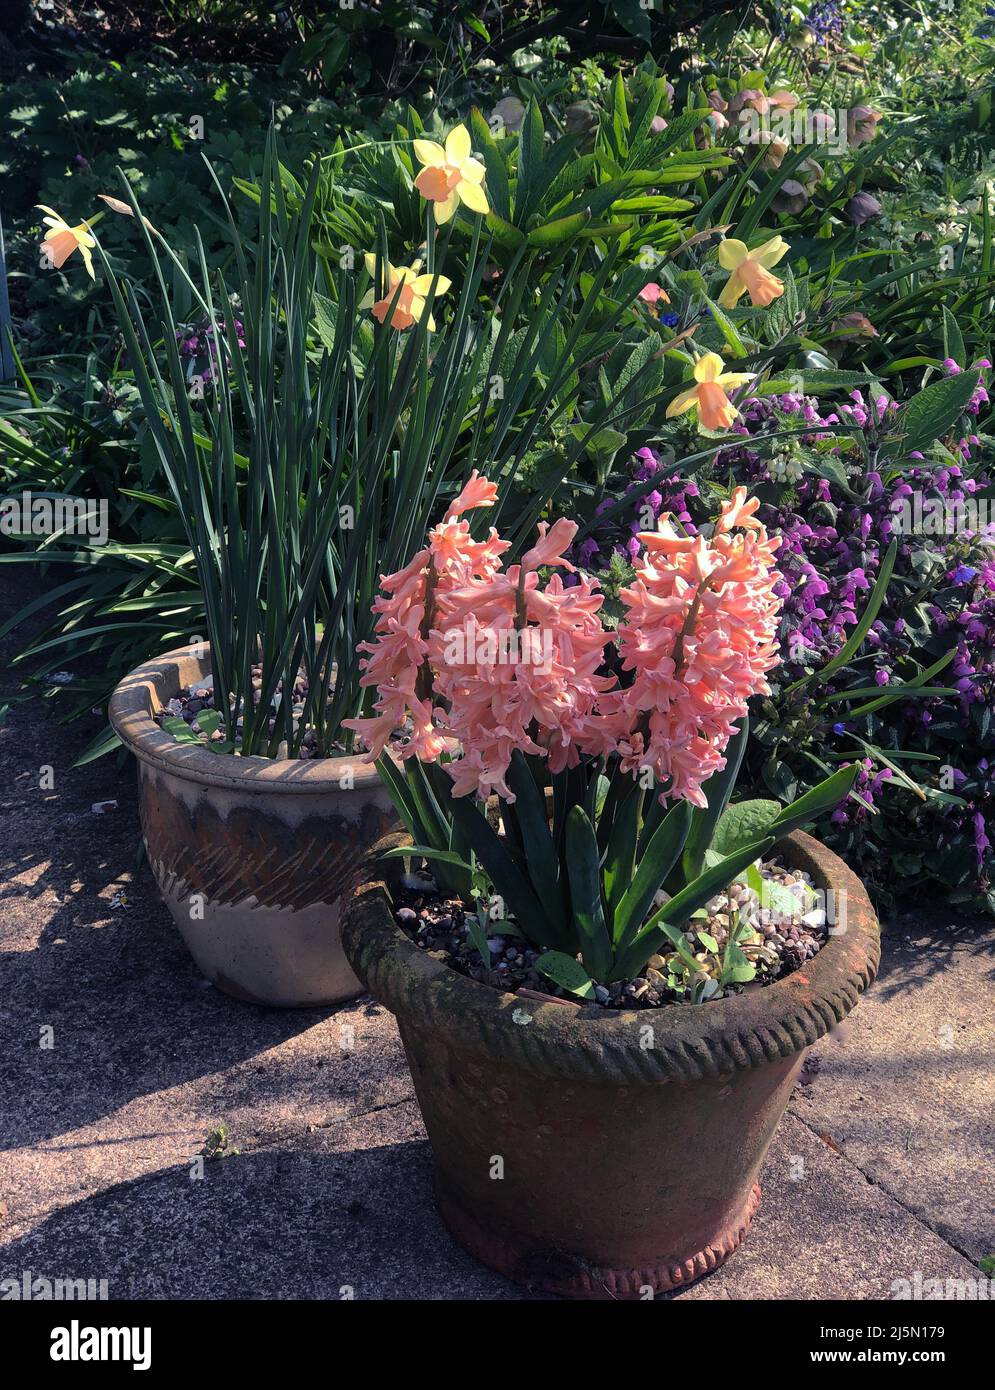 Hyacinth 'Gypsy Queen' & Narcissus 'Blushing Lady' Stock Photo